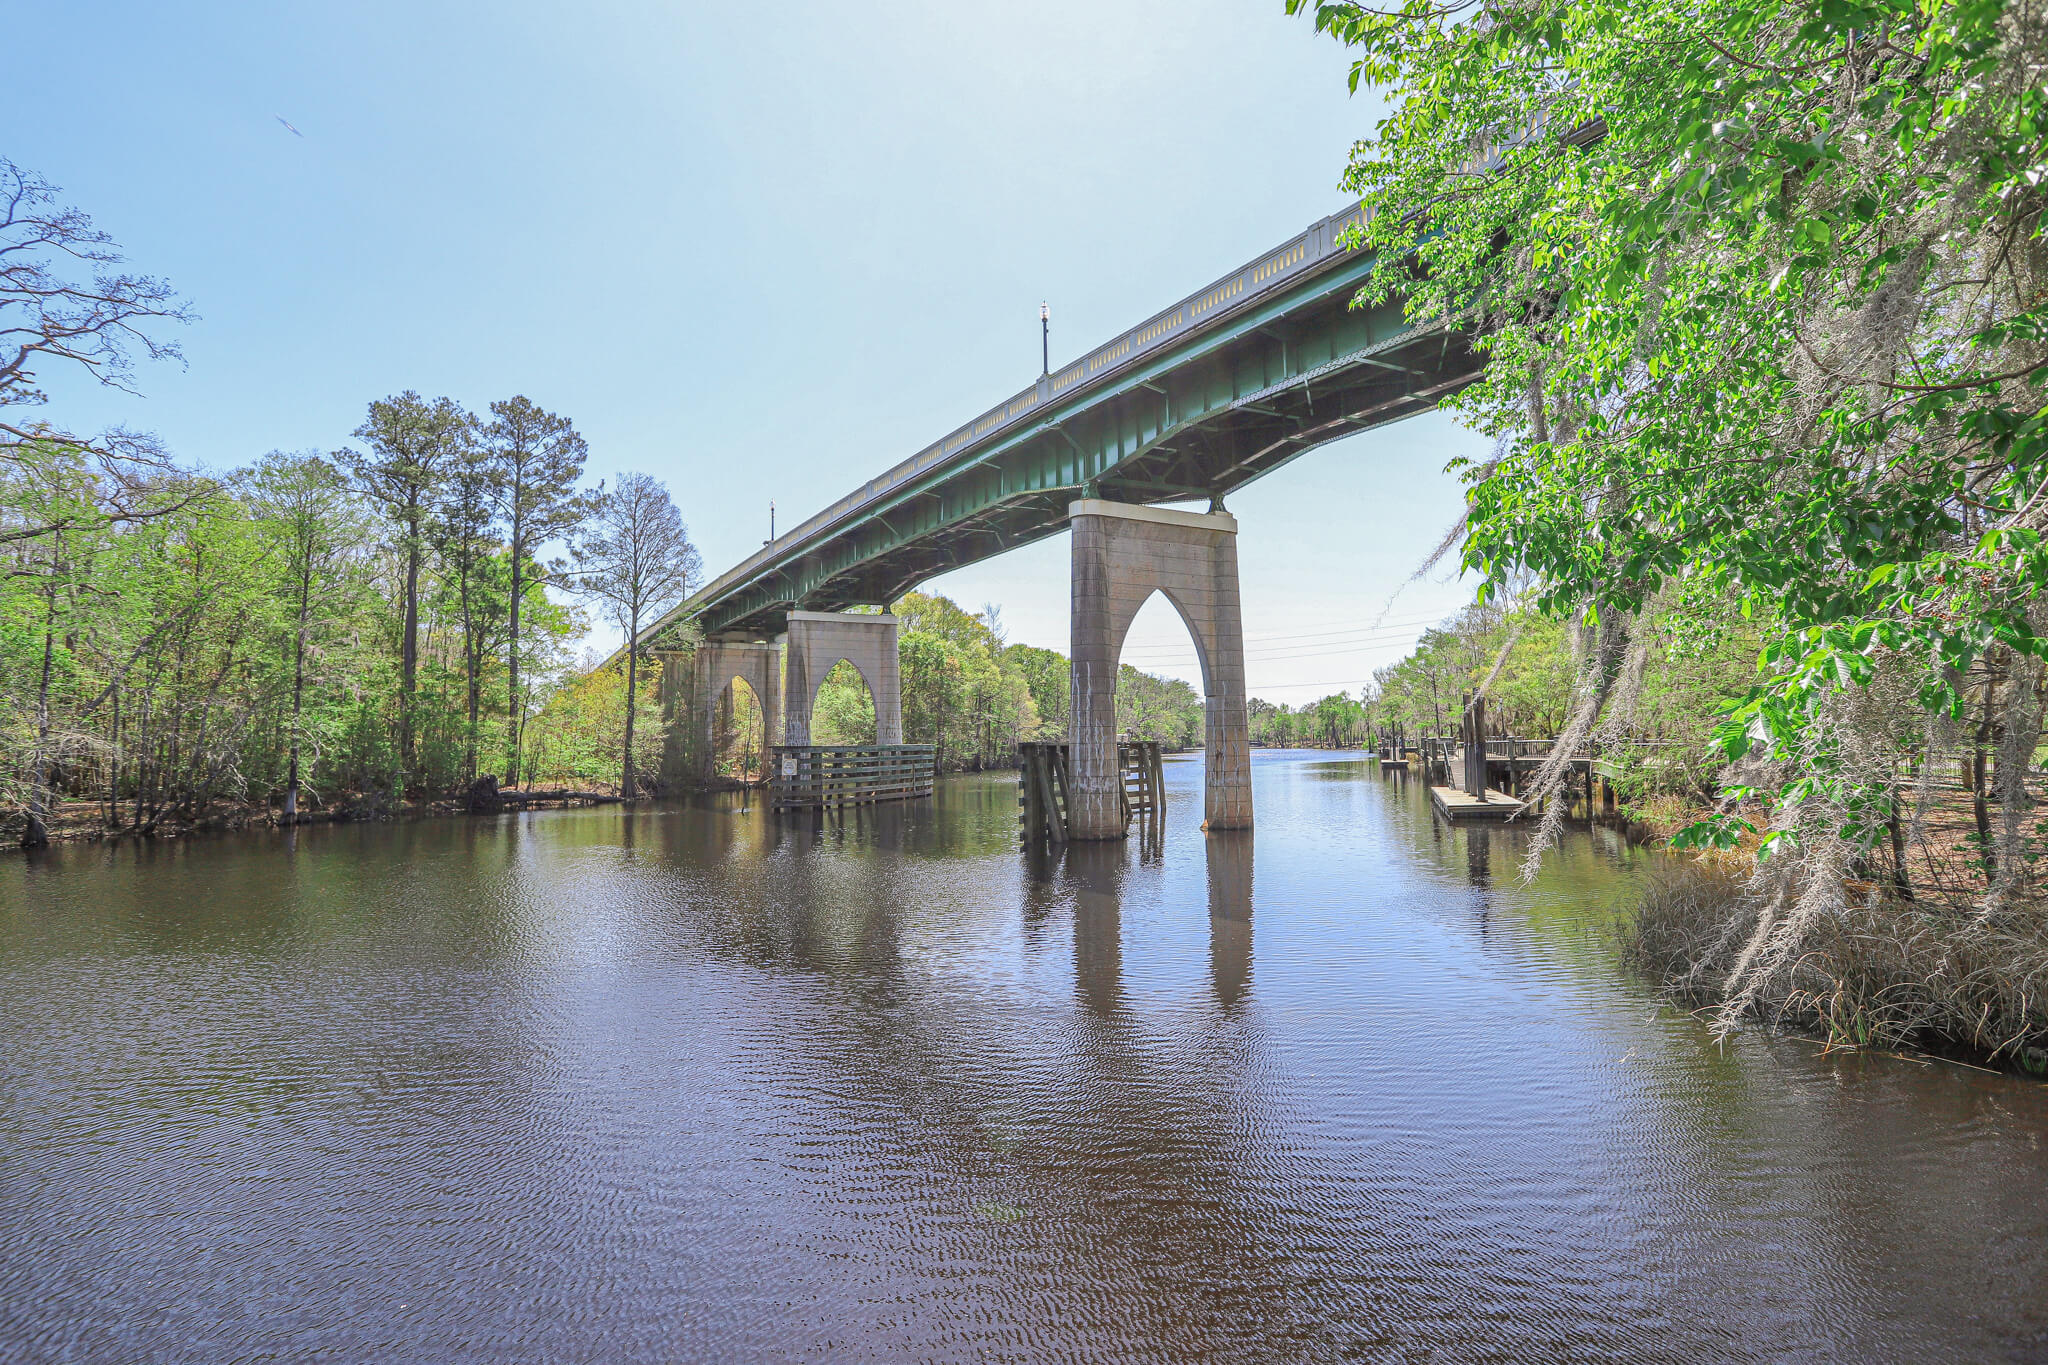 Downtown Conway SC Waccamaw River Image